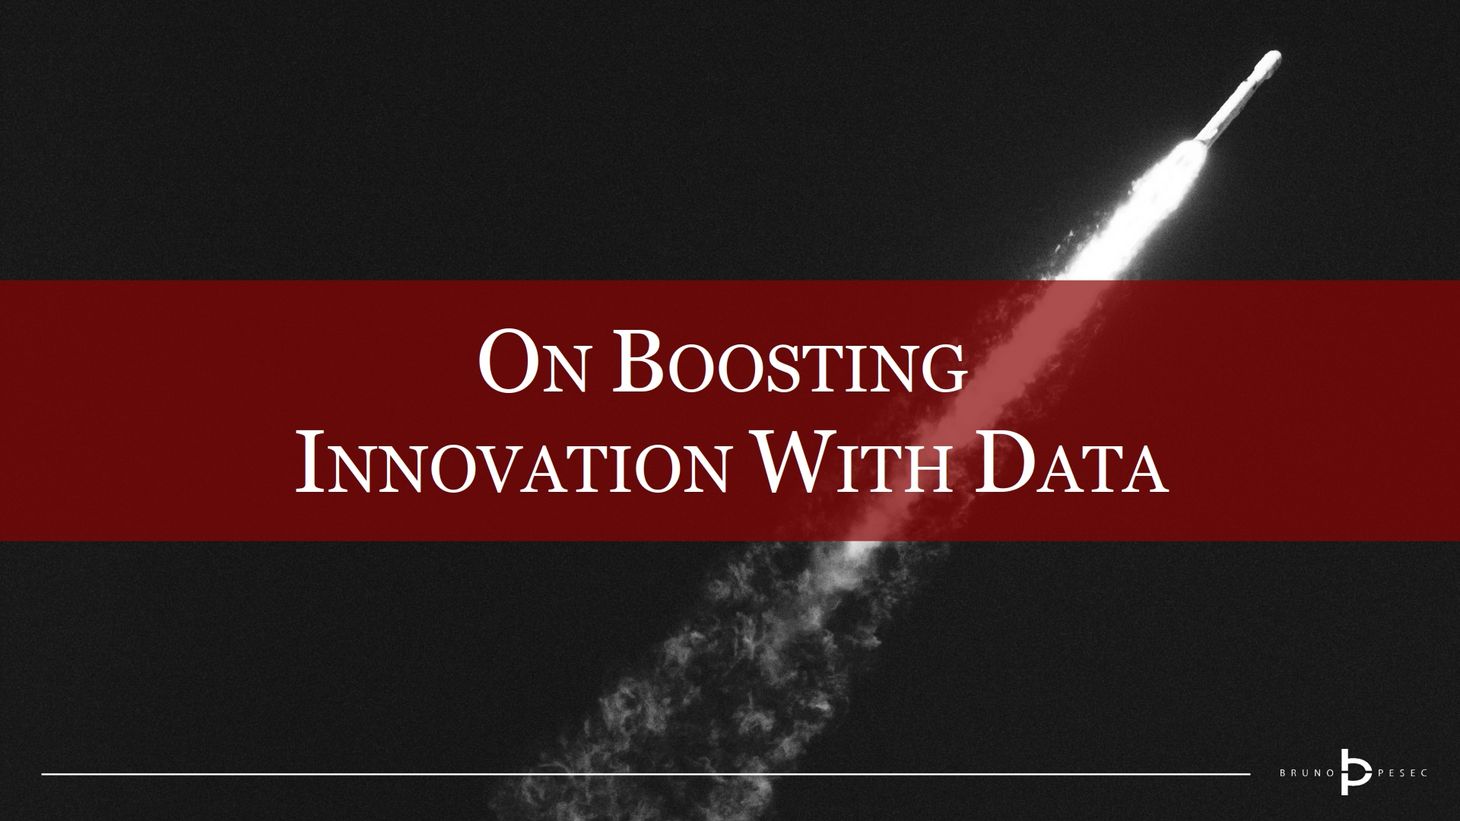 On boosting innovation with data